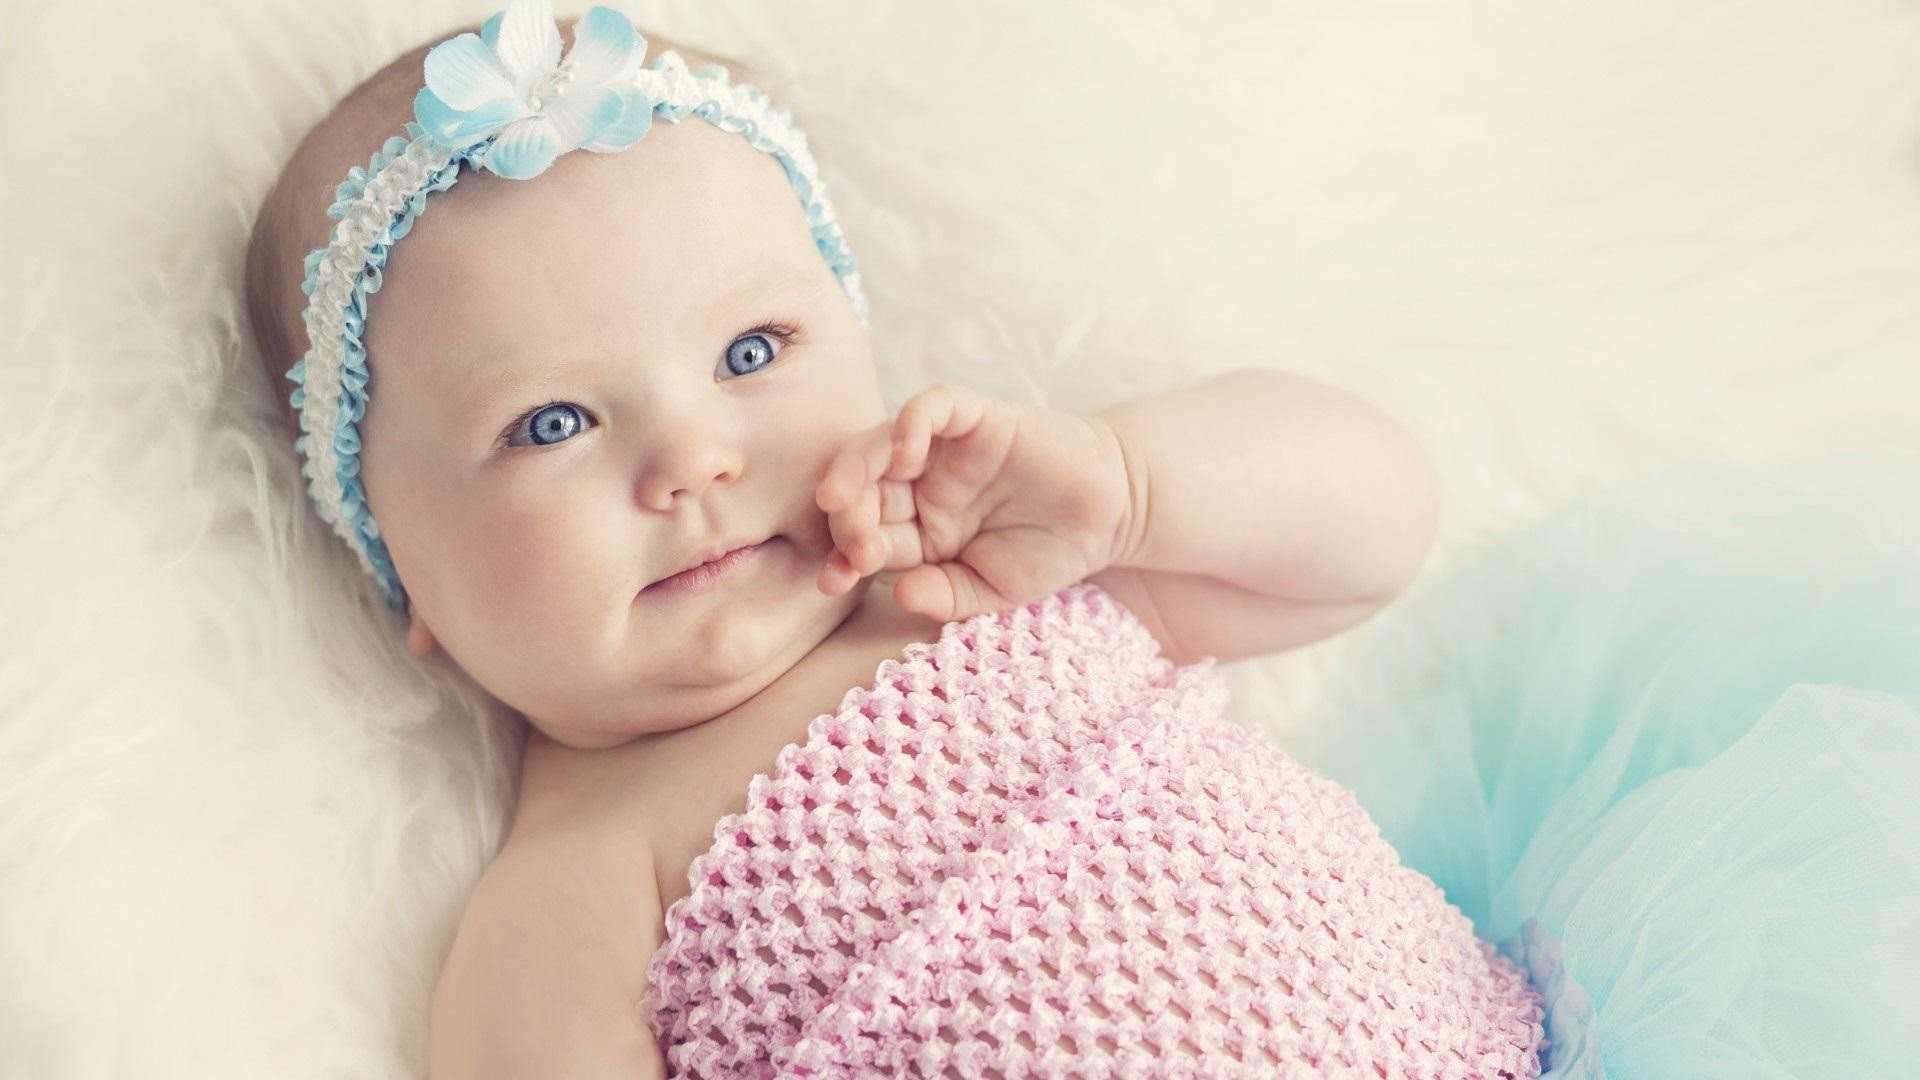 baby hd wallpapers 1080p,child,baby,photograph,face,skin